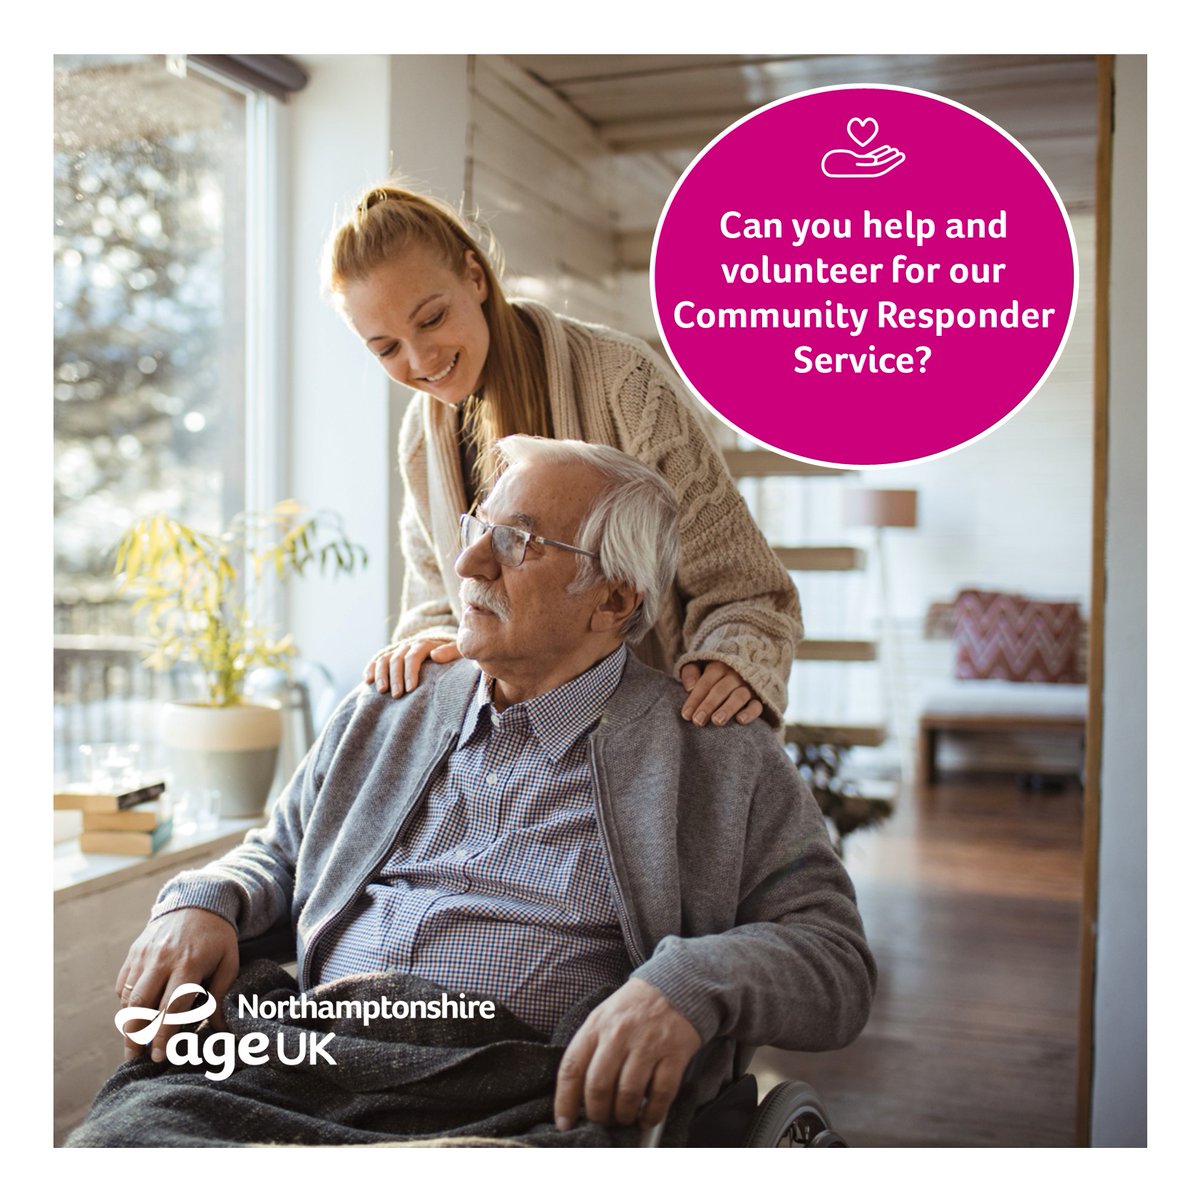 We need community responder #volunteers in #Northamptonshire. To provide reassurance and support to an older person in their home. This could be a welfare check or when a delay is anticipated for Primary or Secondary care support. Call 01604 210618. bit.ly/3Zz4UaM